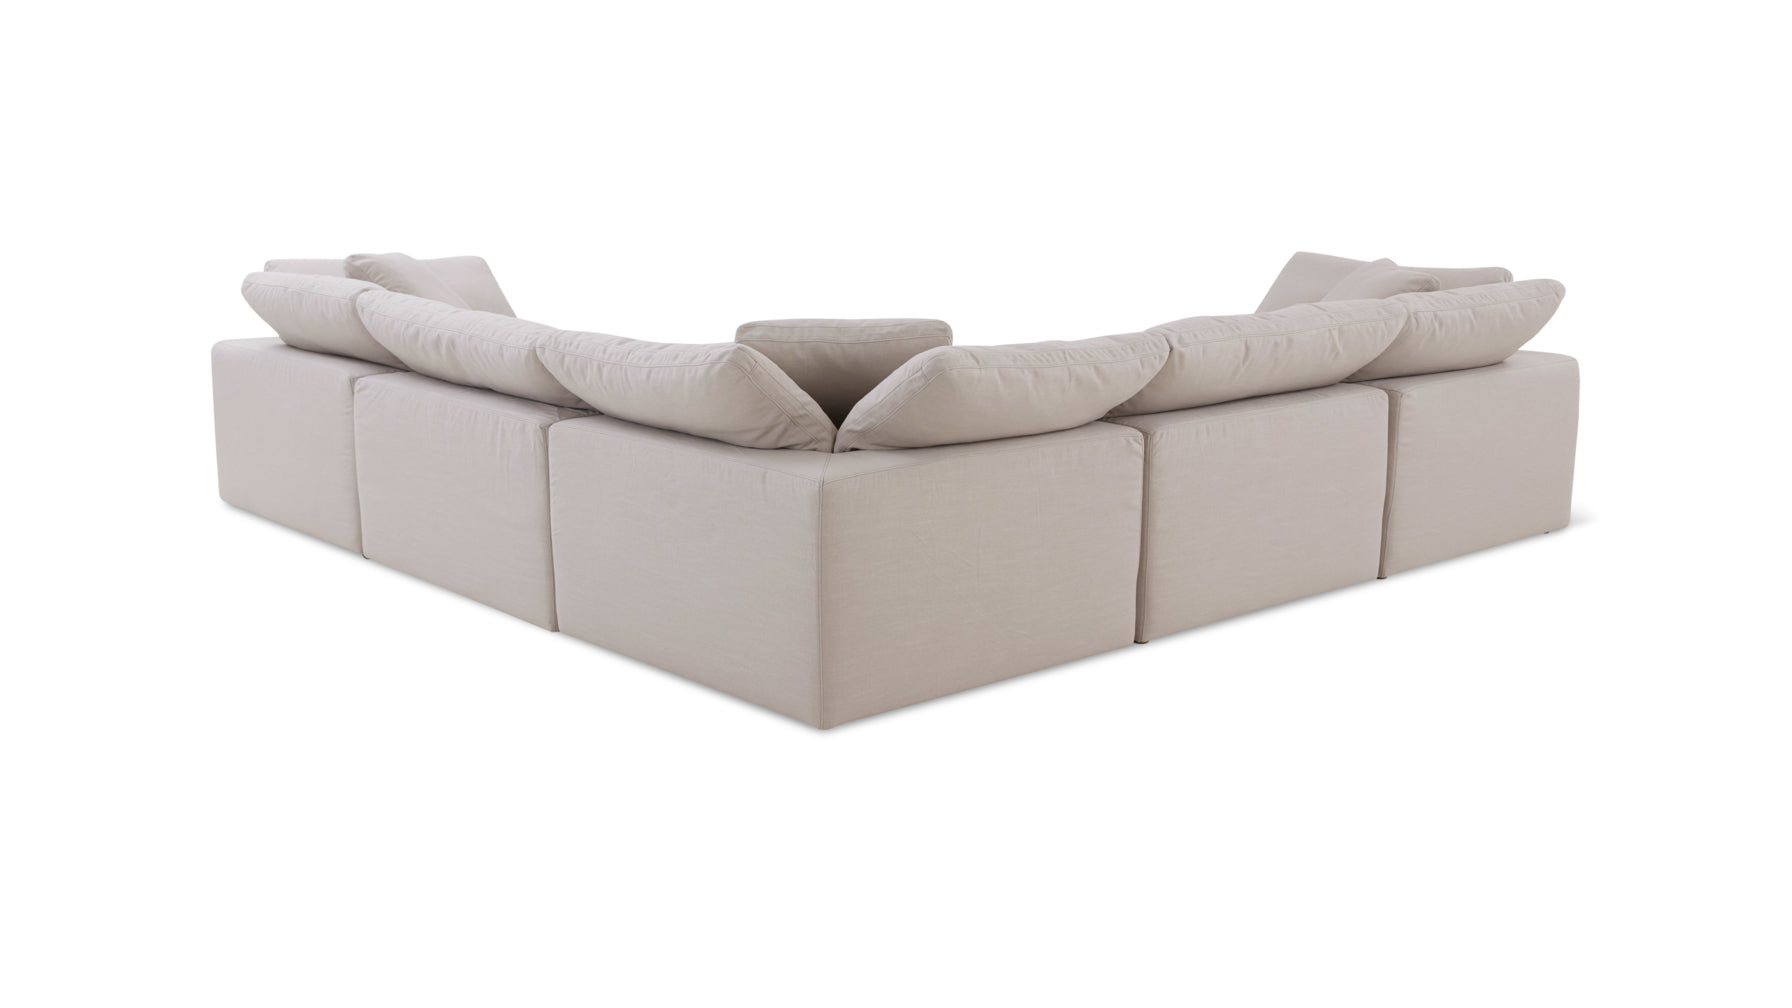 Movie Night™ 5-Piece Modular Sectional Closed, Standard, Clay - Image 8